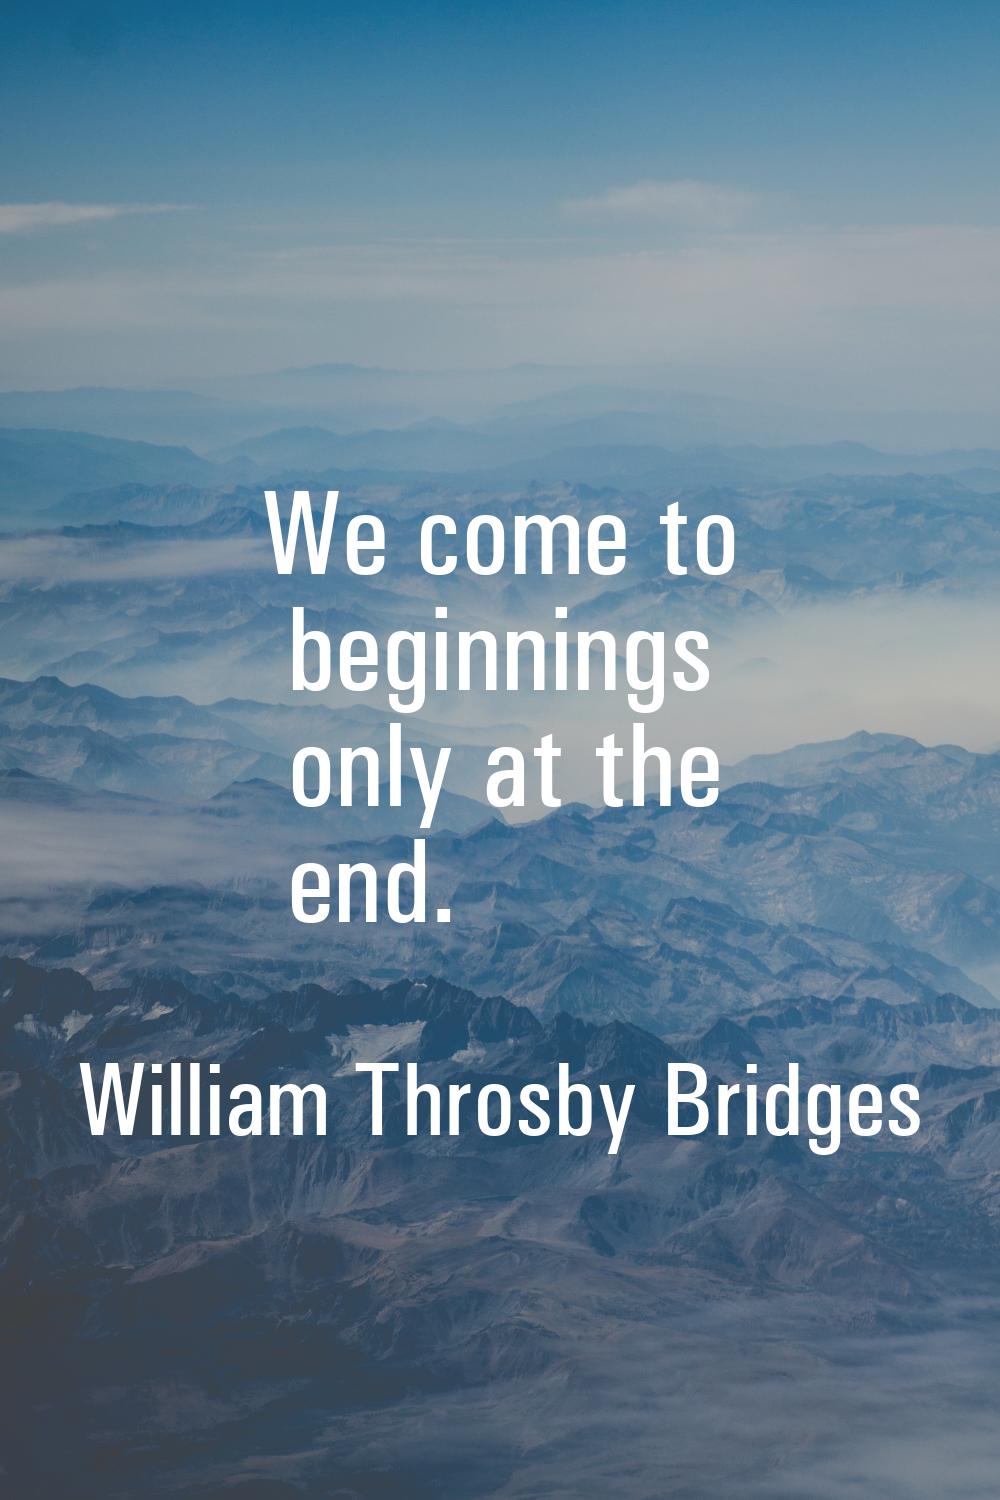 We come to beginnings only at the end.